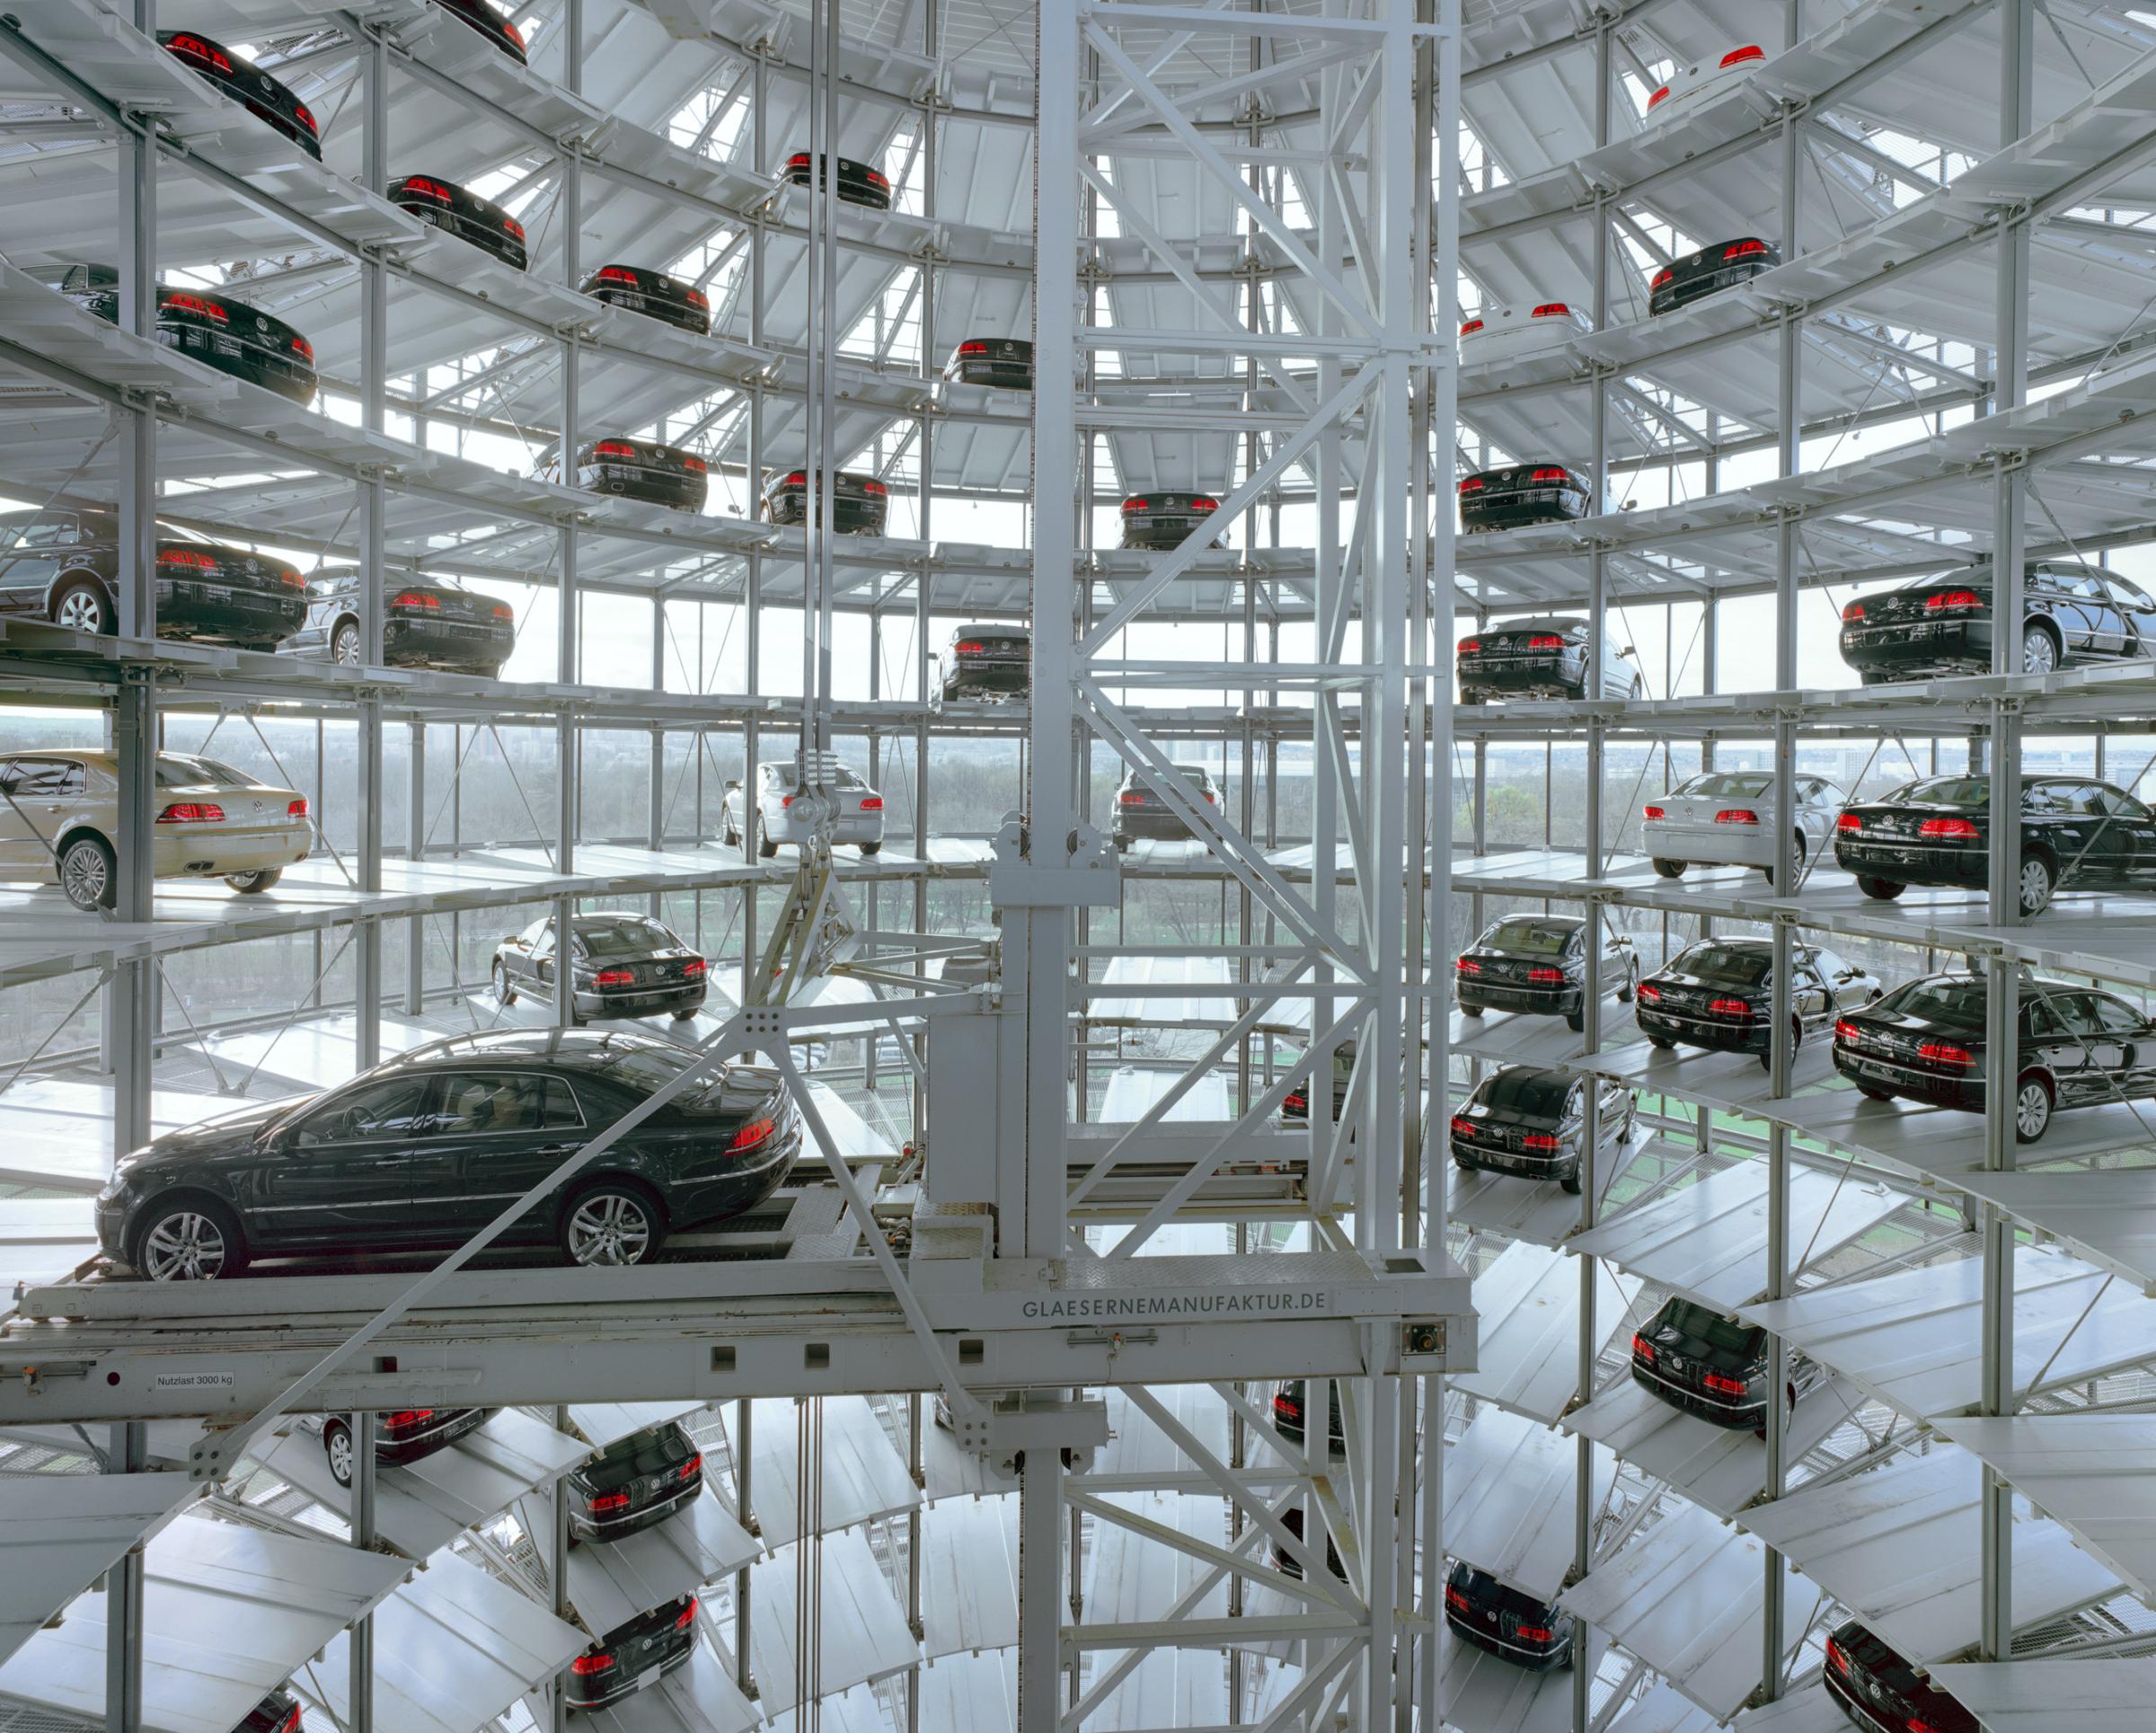 Volkswagen's Transparent Factory in Dresden, Germany, where the luxury VW Phaeton cars are assembled.